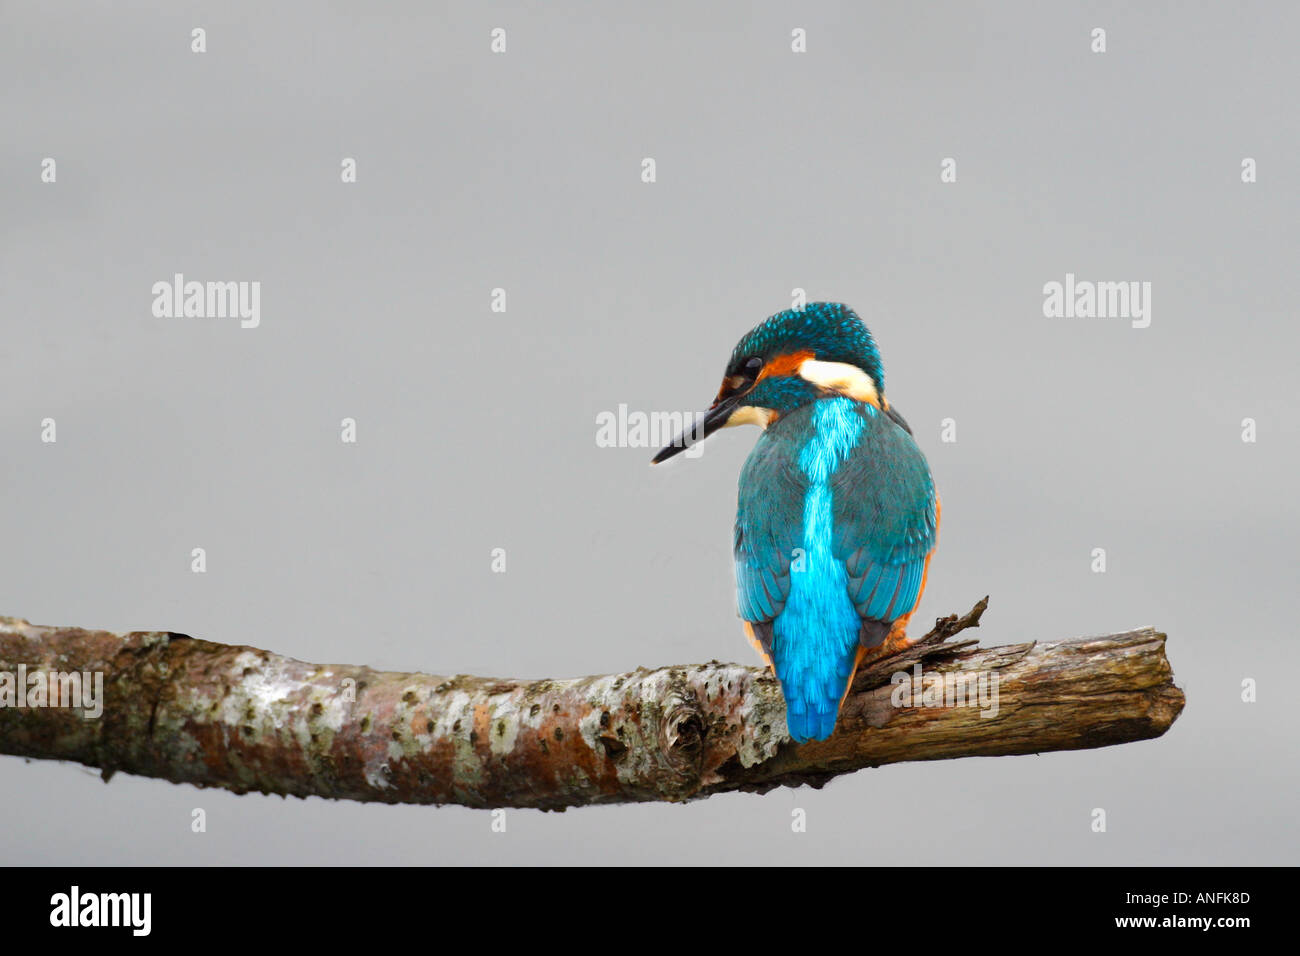 Kingfisher Alcedo Atthis perched on branch Welsh Wildlife Centre Cardigan Cymru Wales UK Stock Photo